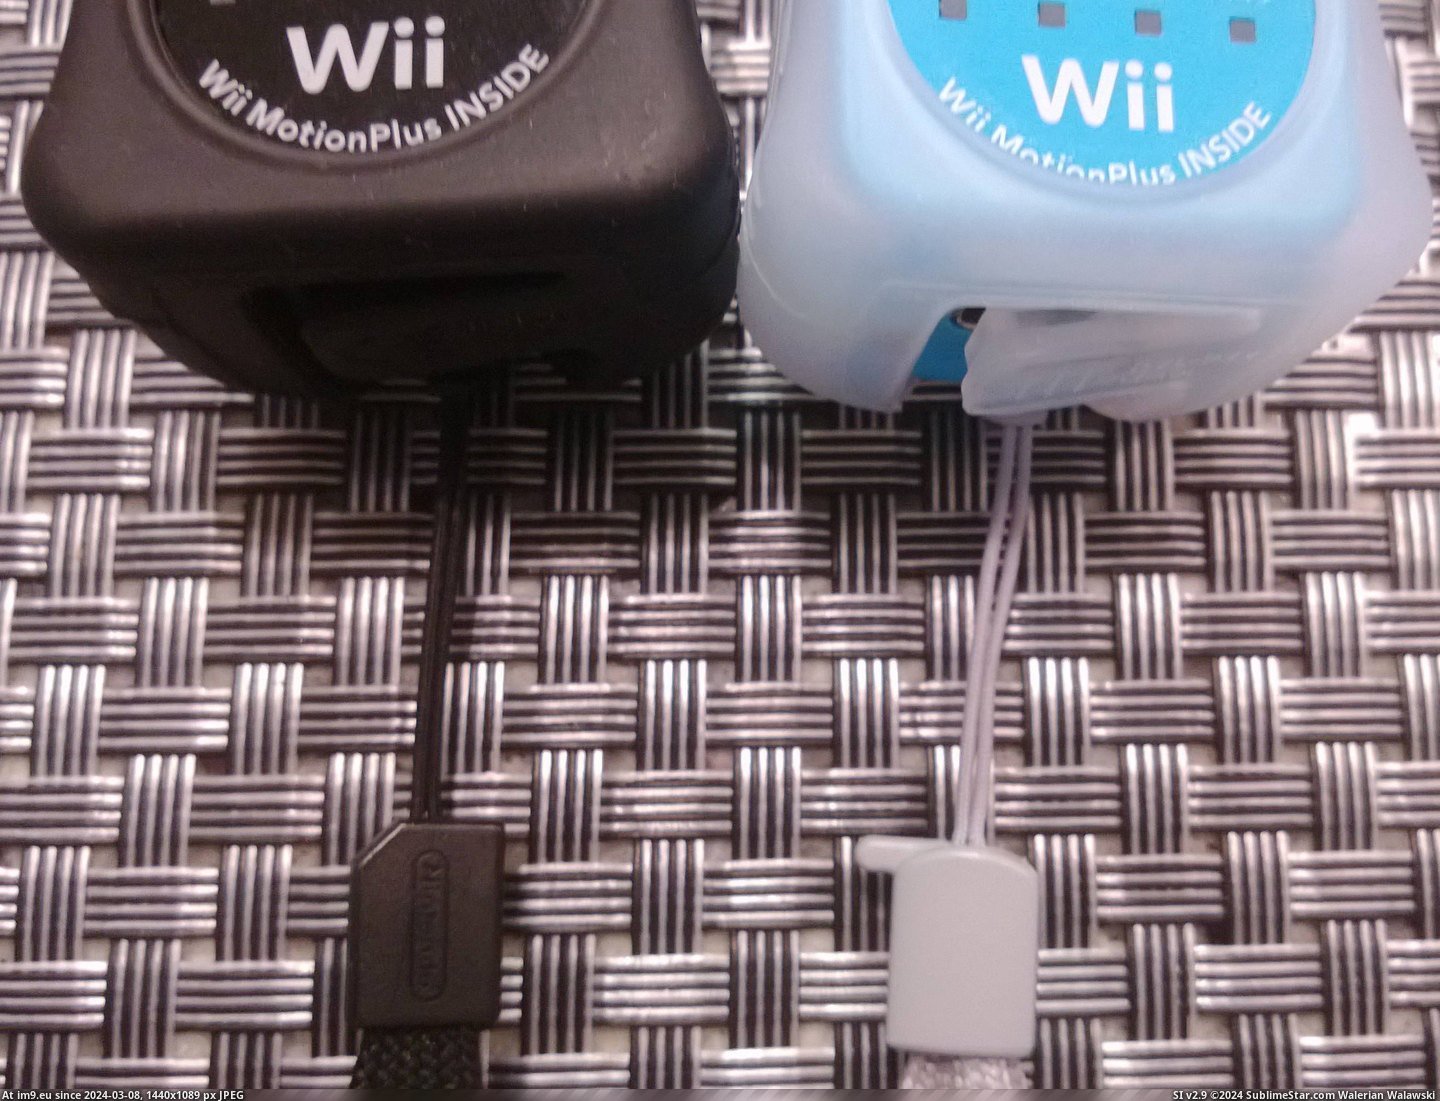 #Gaming #Older #Shape #Clasp #Wiimote #Notice #Wii #Newer [Gaming] Does anyone else notice that the older wiimote clasp is in the shape of a Wii, and the newer wiimote clasp is in the sh Pic. (Image of album My r/GAMING favs))